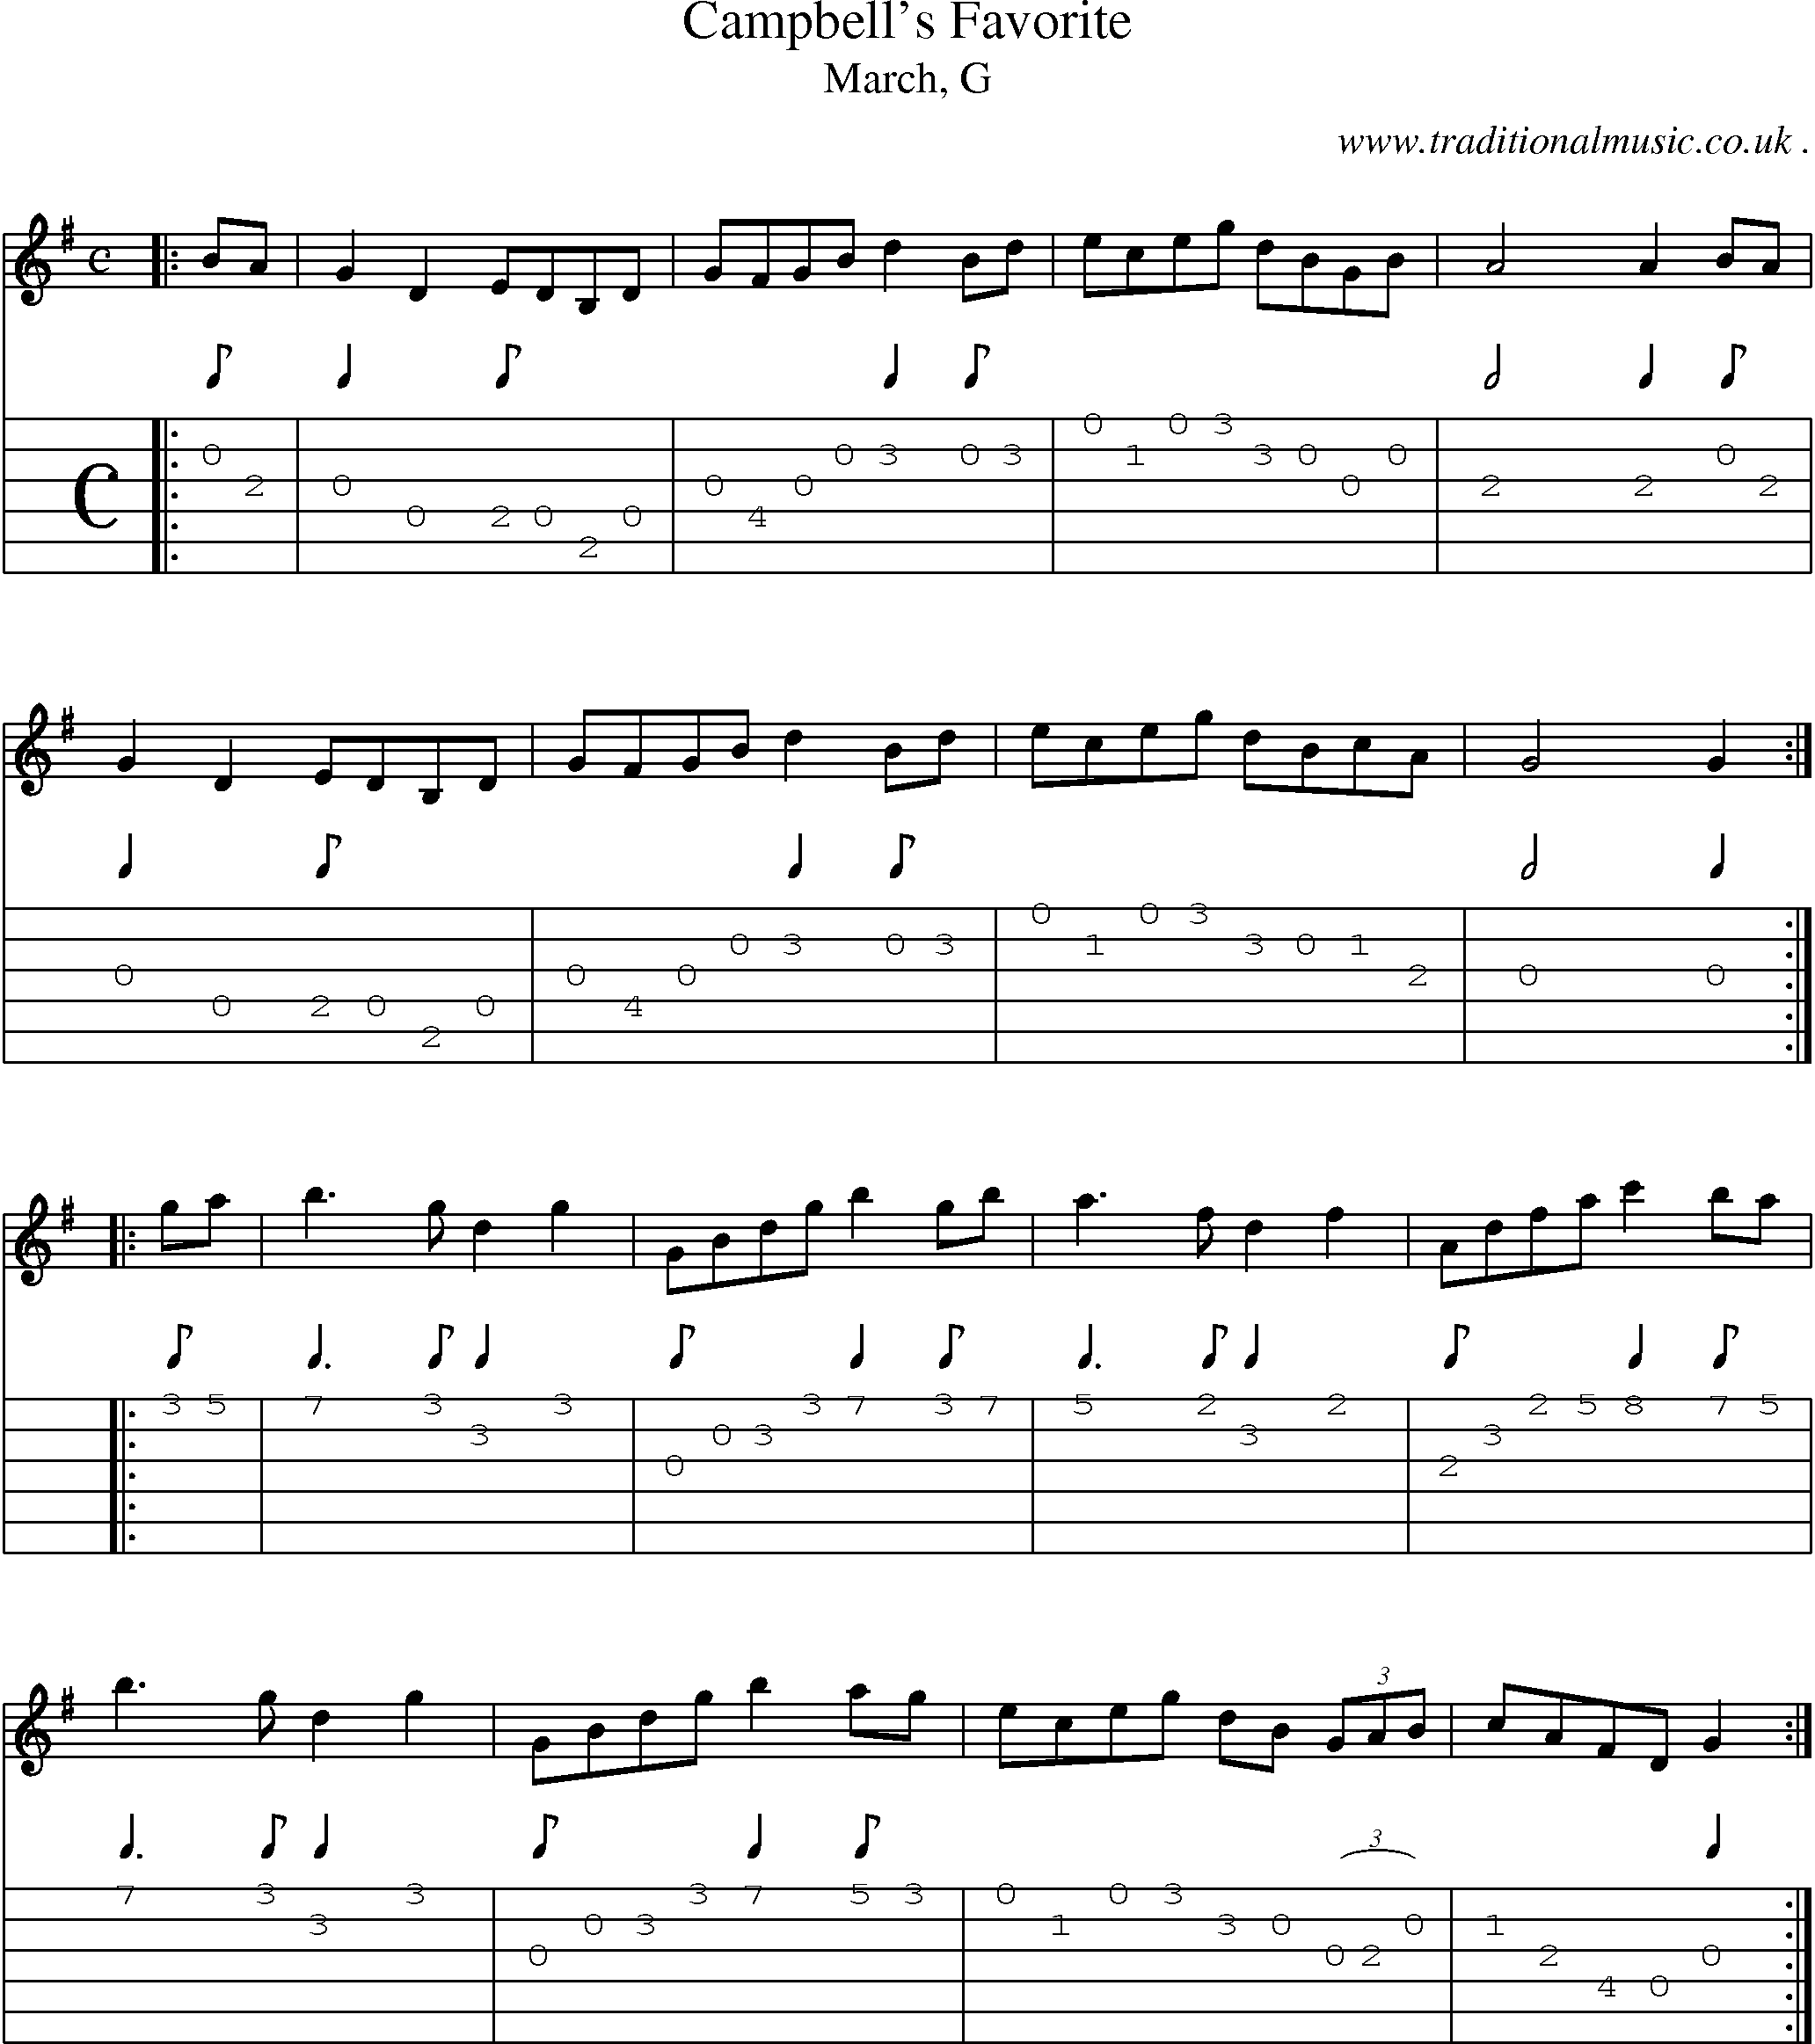 Sheet-music  score, Chords and Guitar Tabs for Campbells Favorite